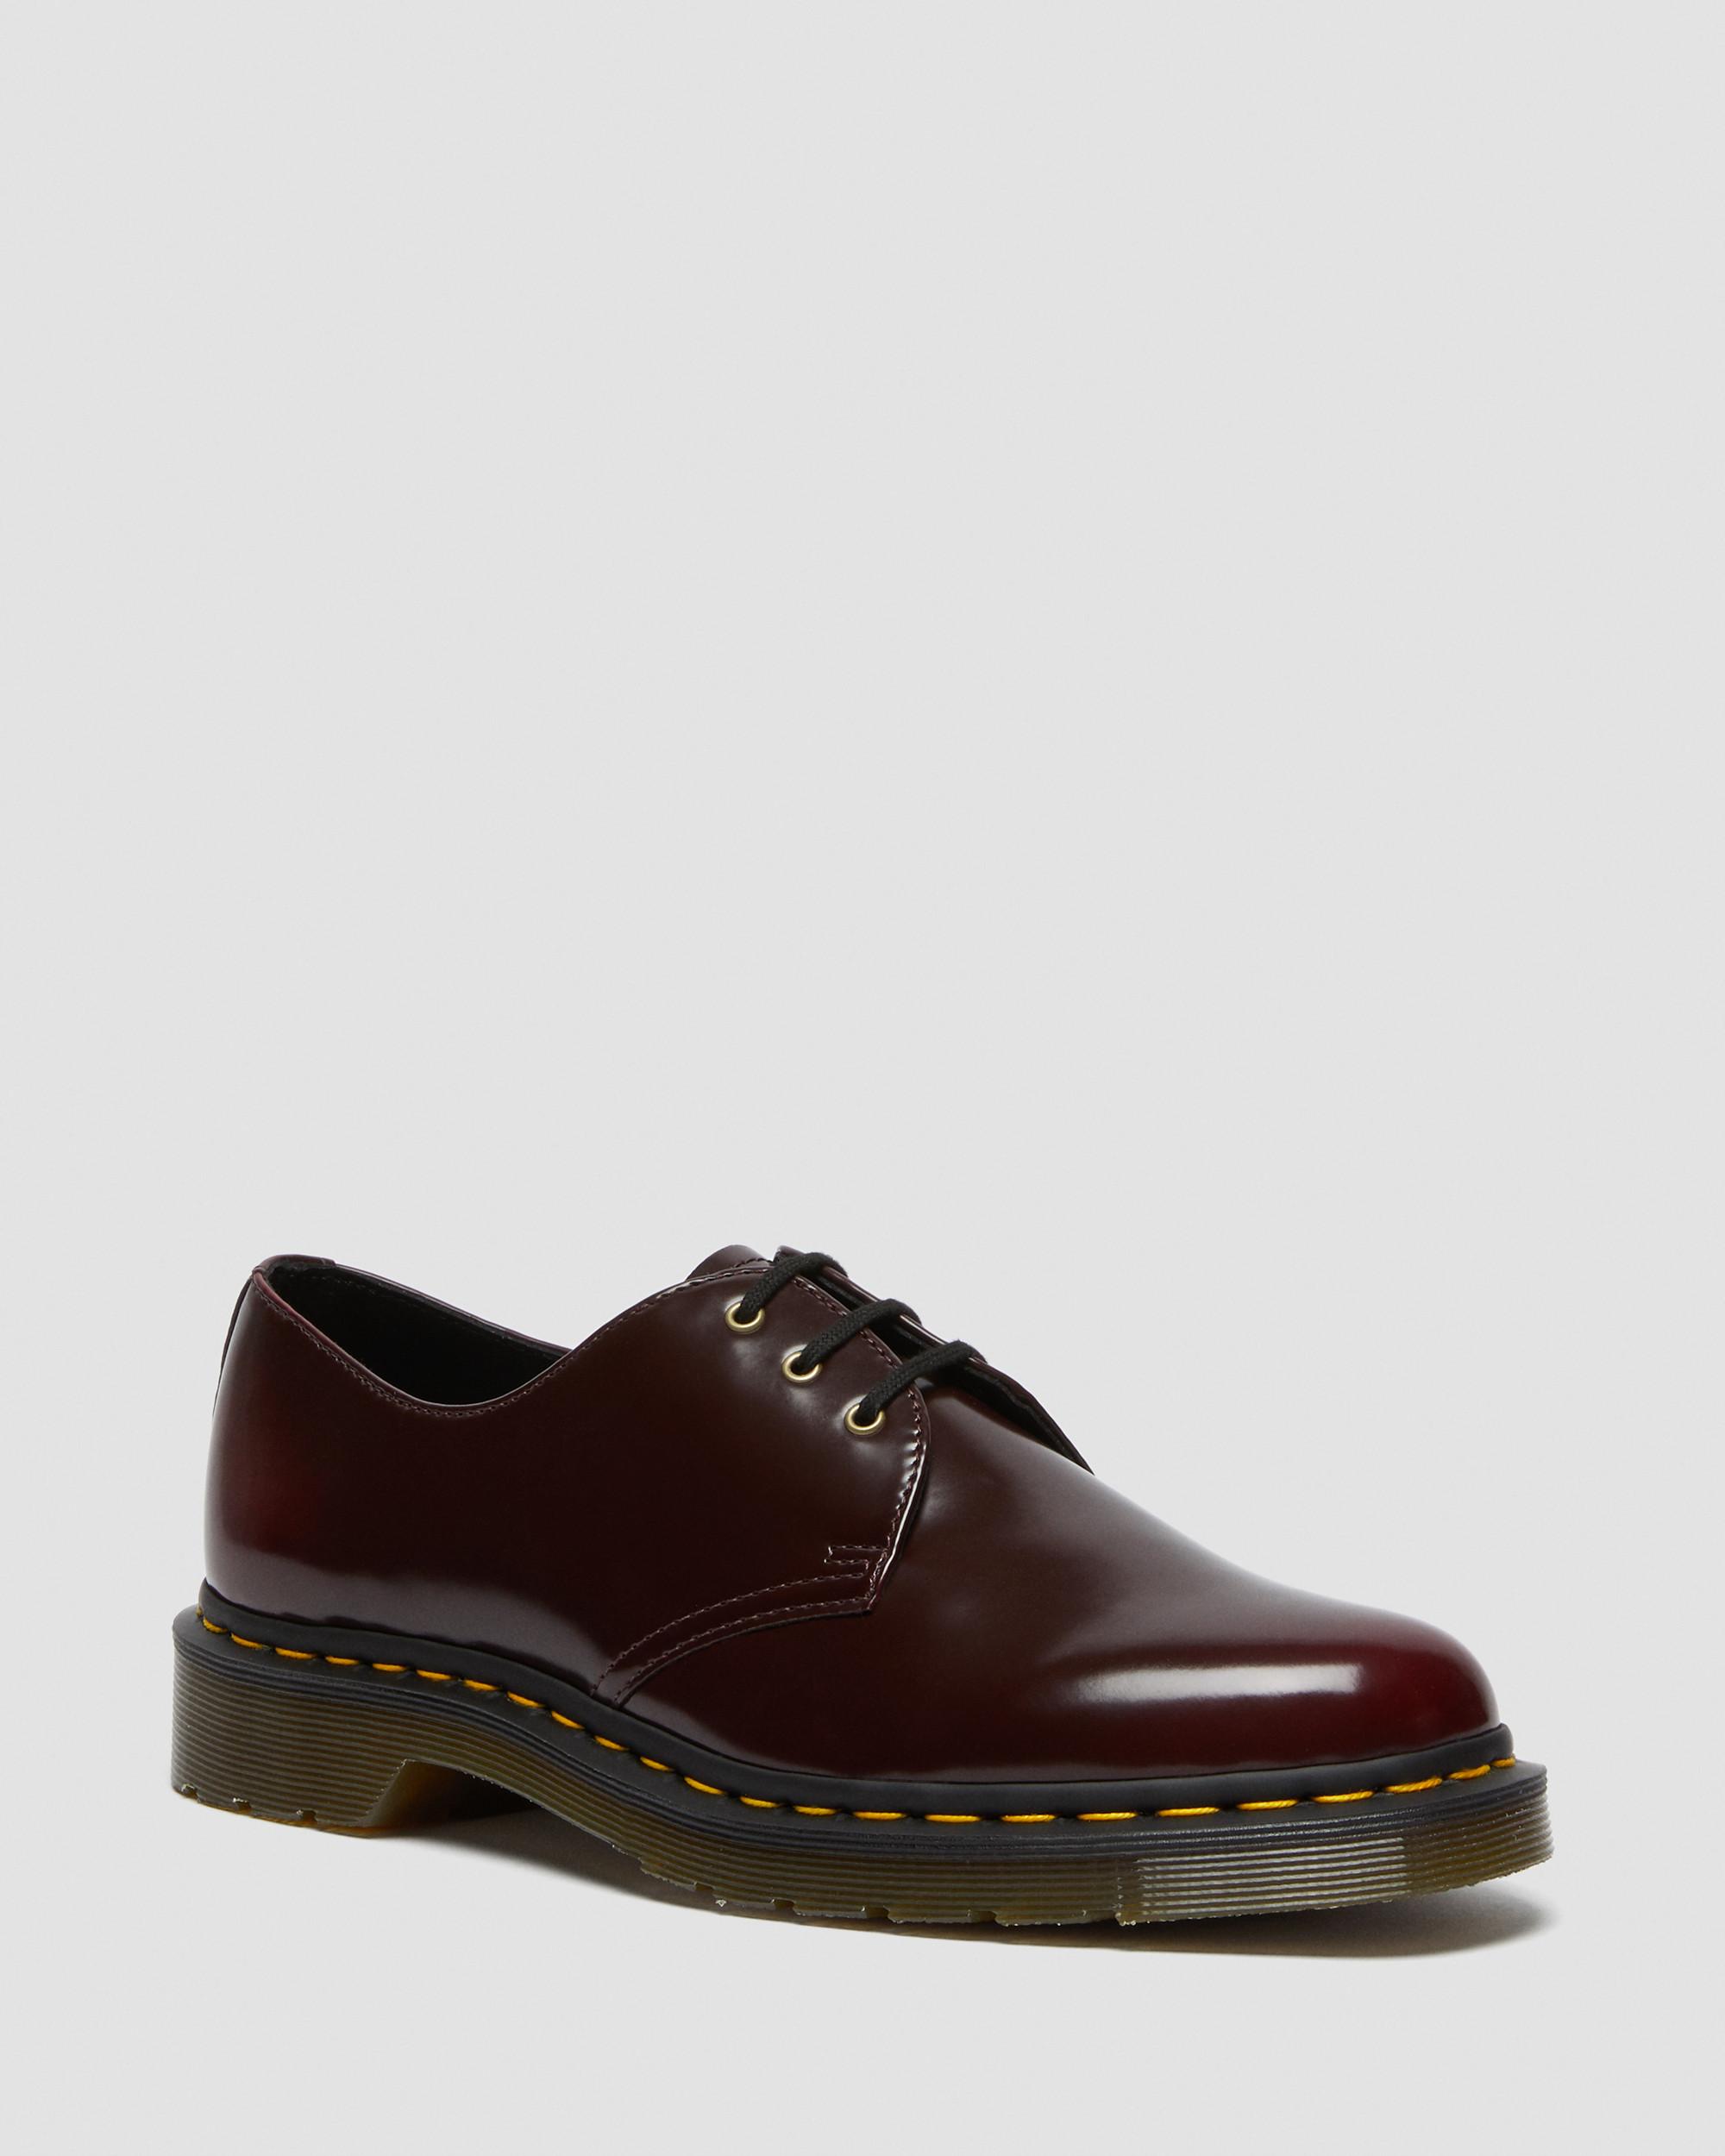 Vegan 1461 Oxford Shoes in Cherry Red | Dr. Martens